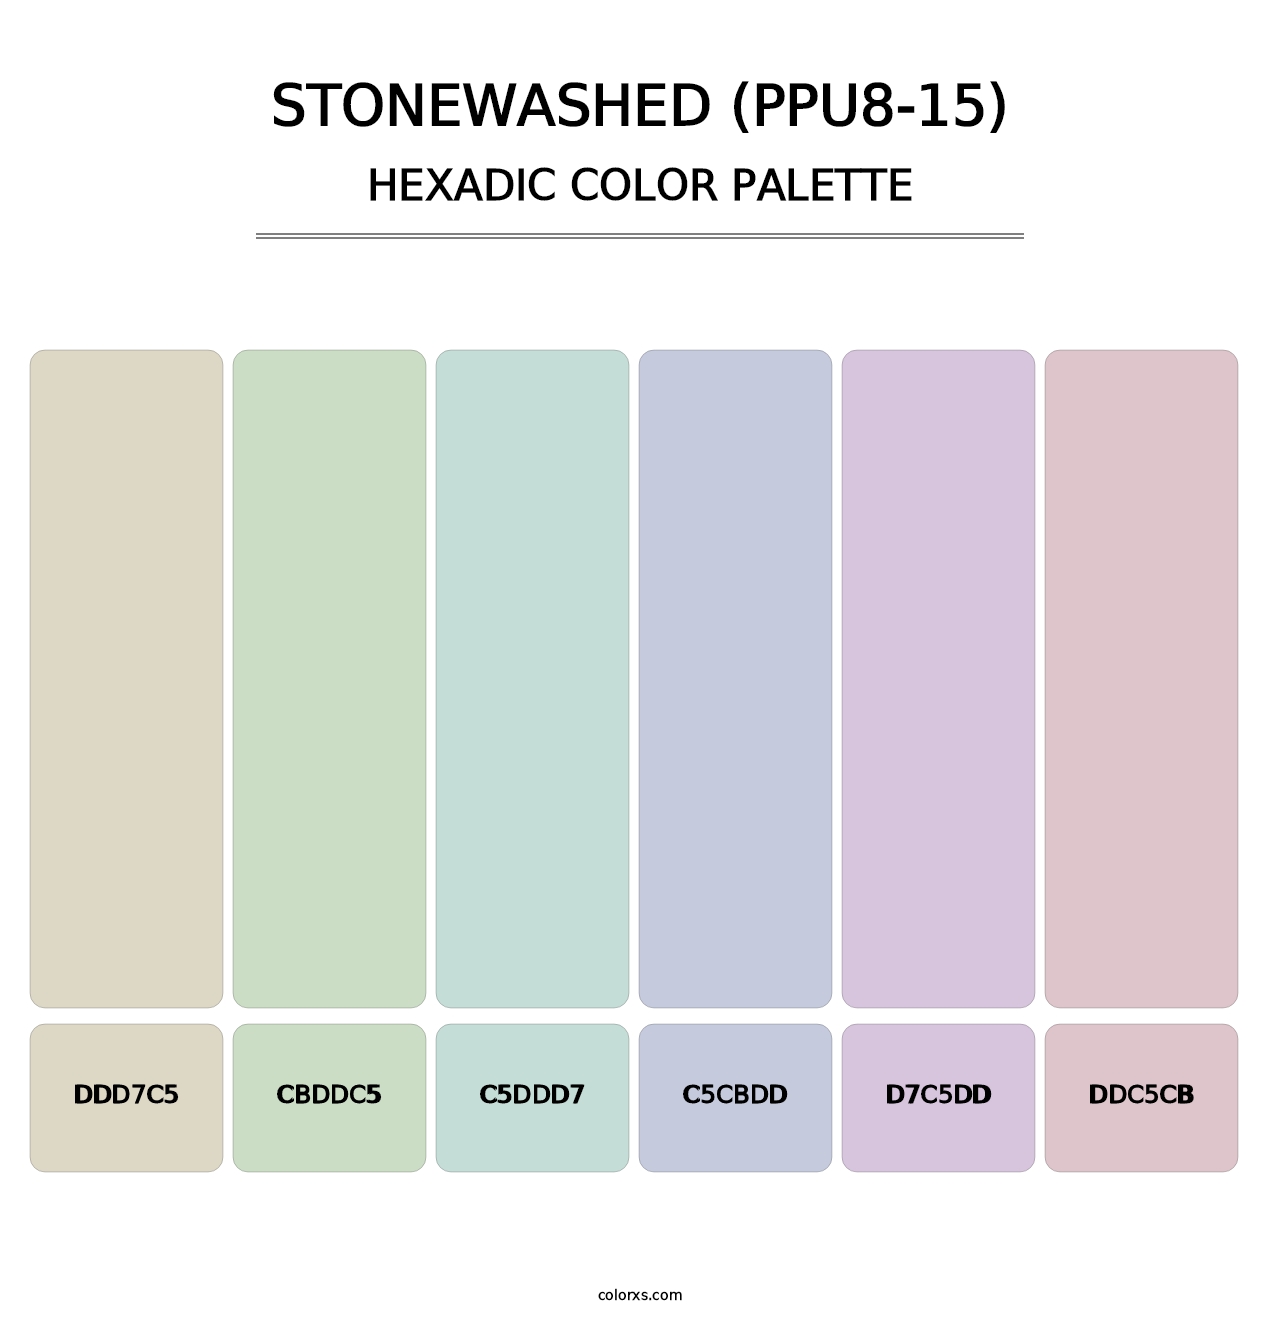 Stonewashed (PPU8-15) - Hexadic Color Palette